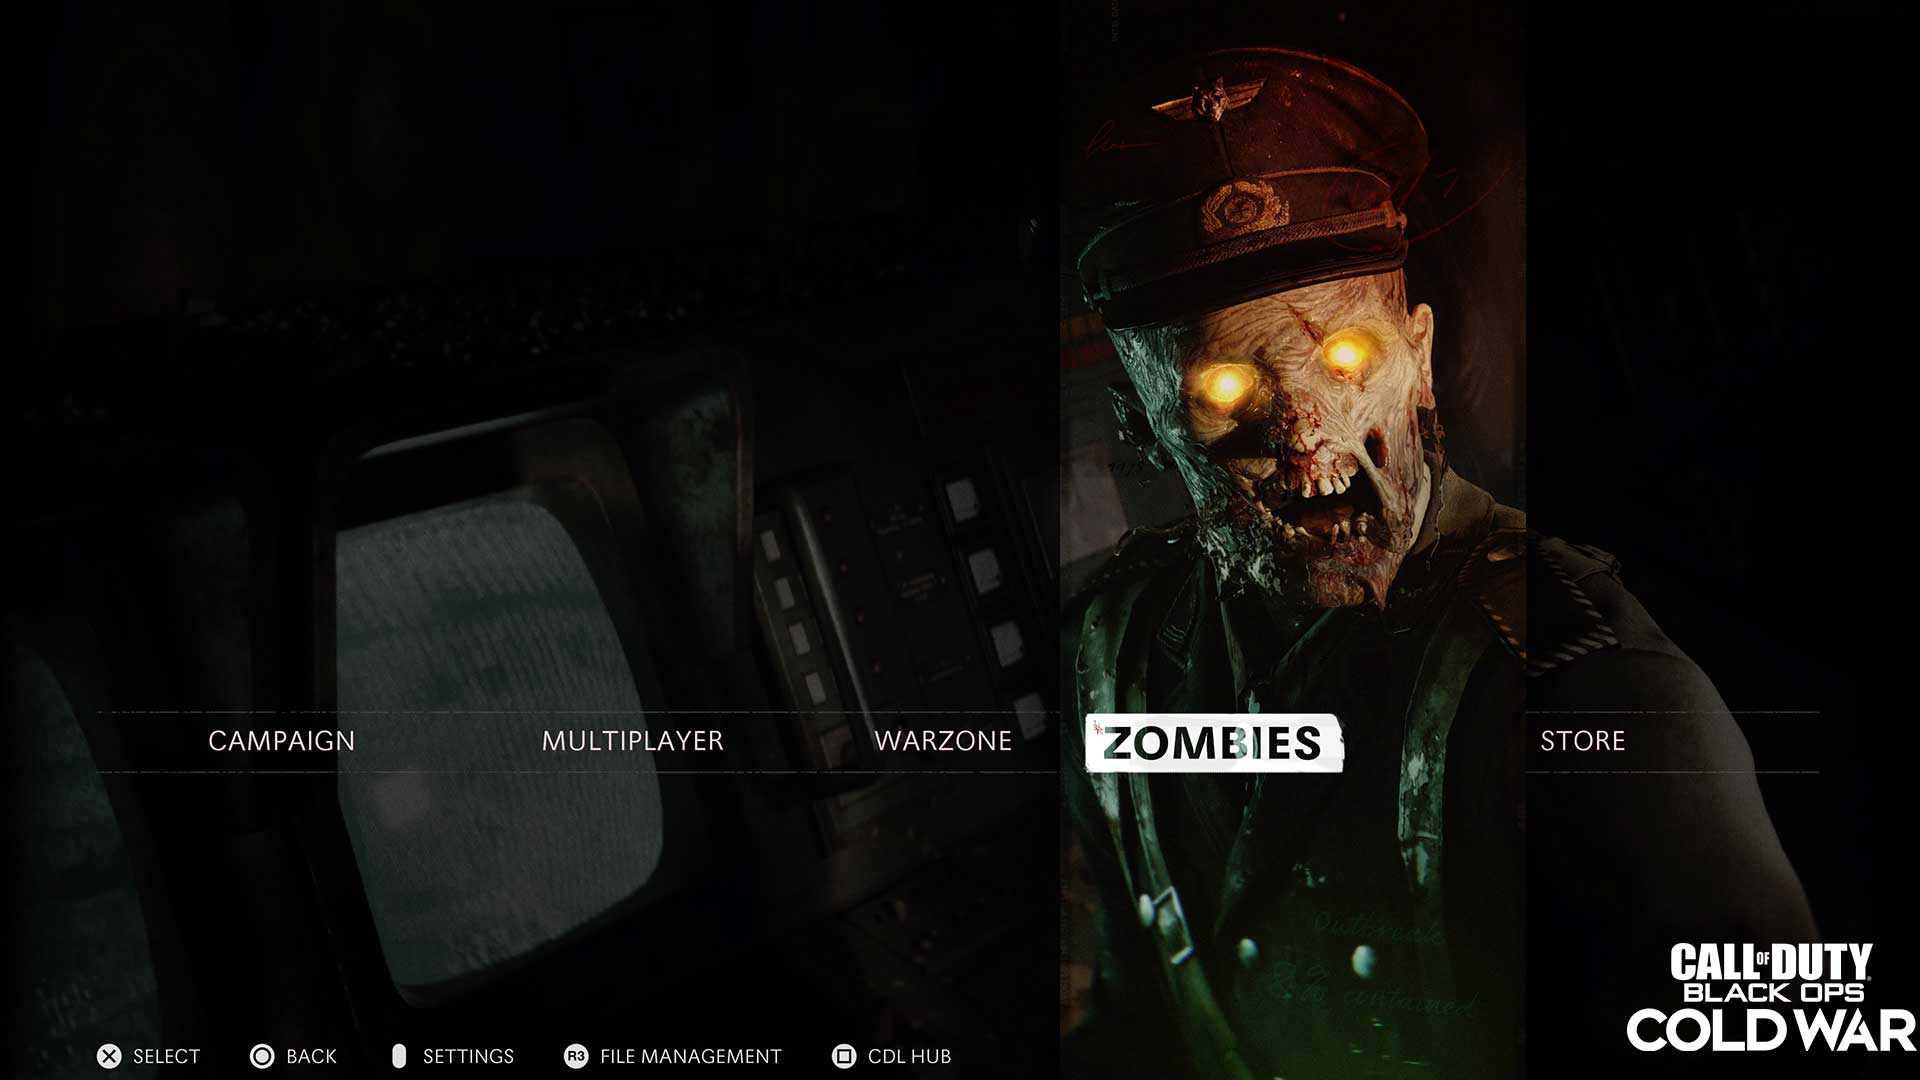 COD: WW2's Zombies campaign will take inspiration from Dead Space